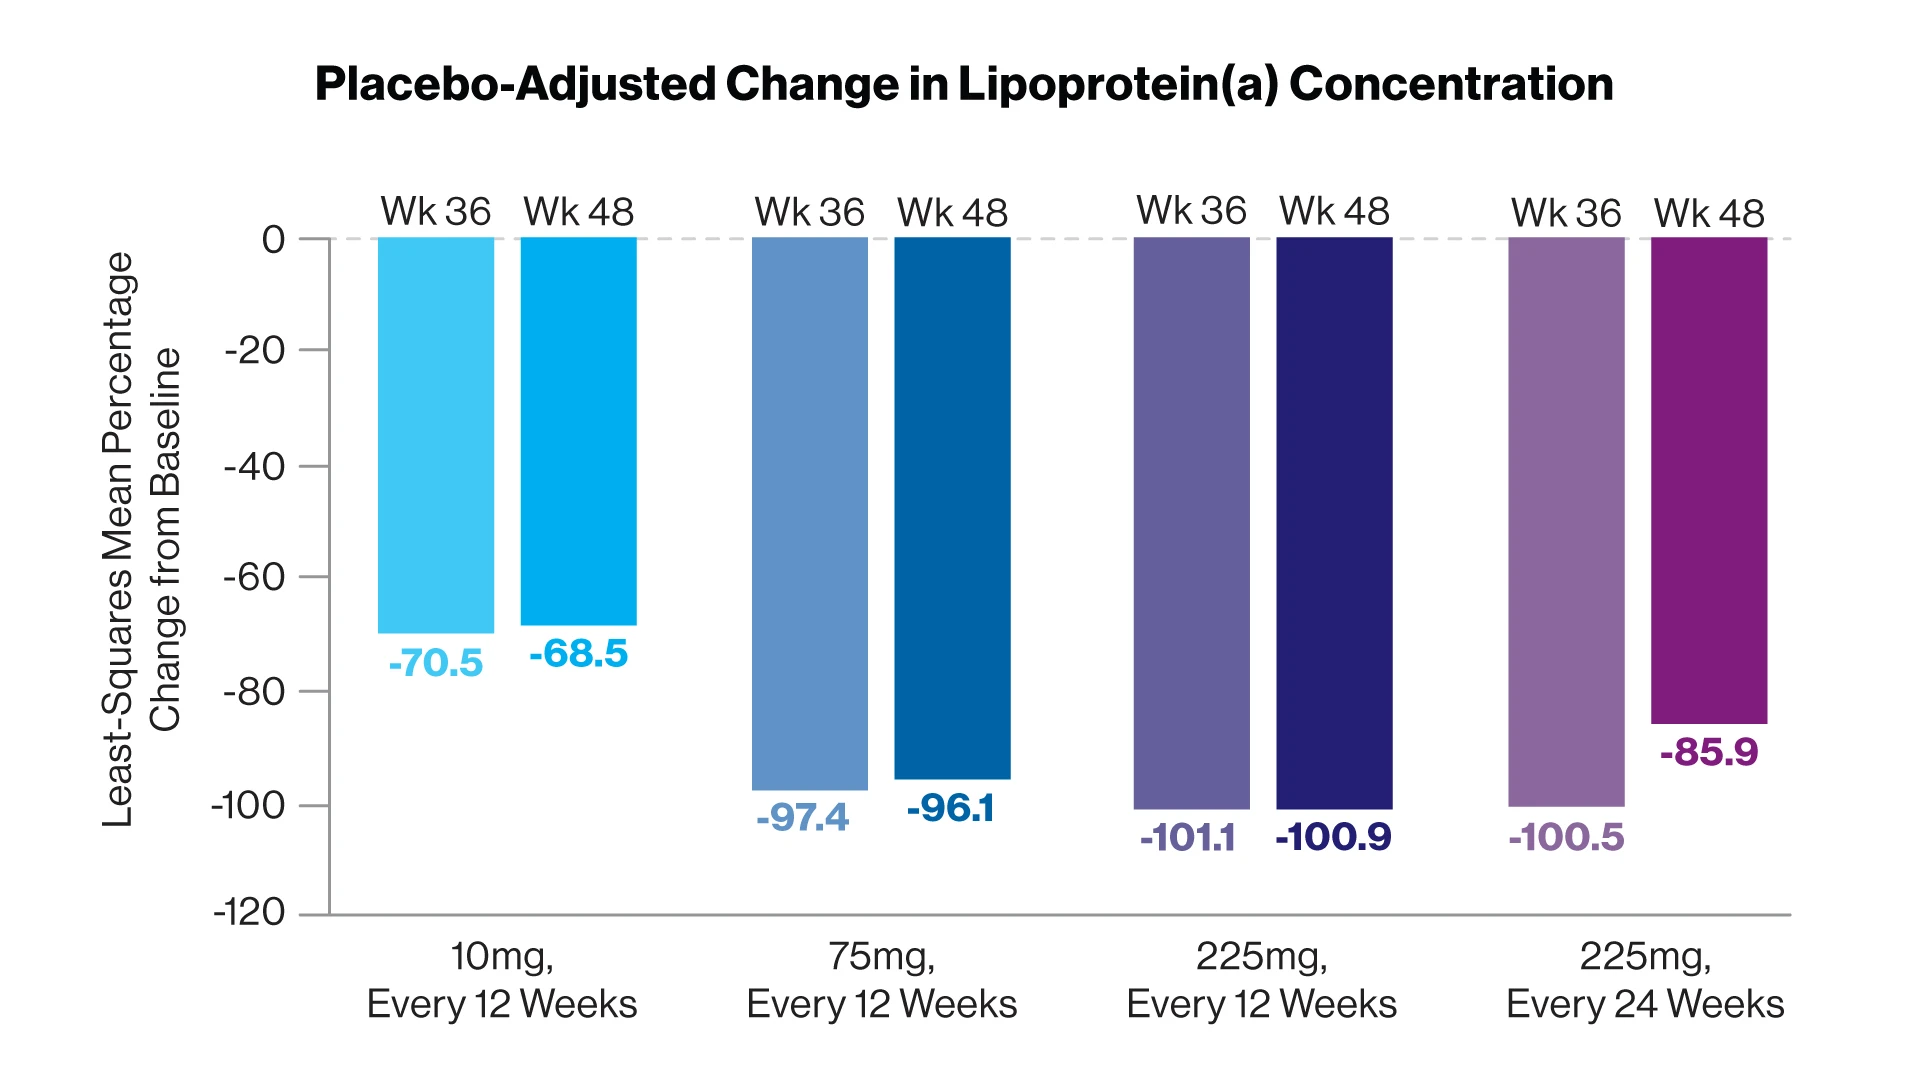 The placebo-adjusted least-squares mean percent change from baseline in the lipoprotein(a) concentration for the four olpasiran dose groups at weeks 36 and 48.